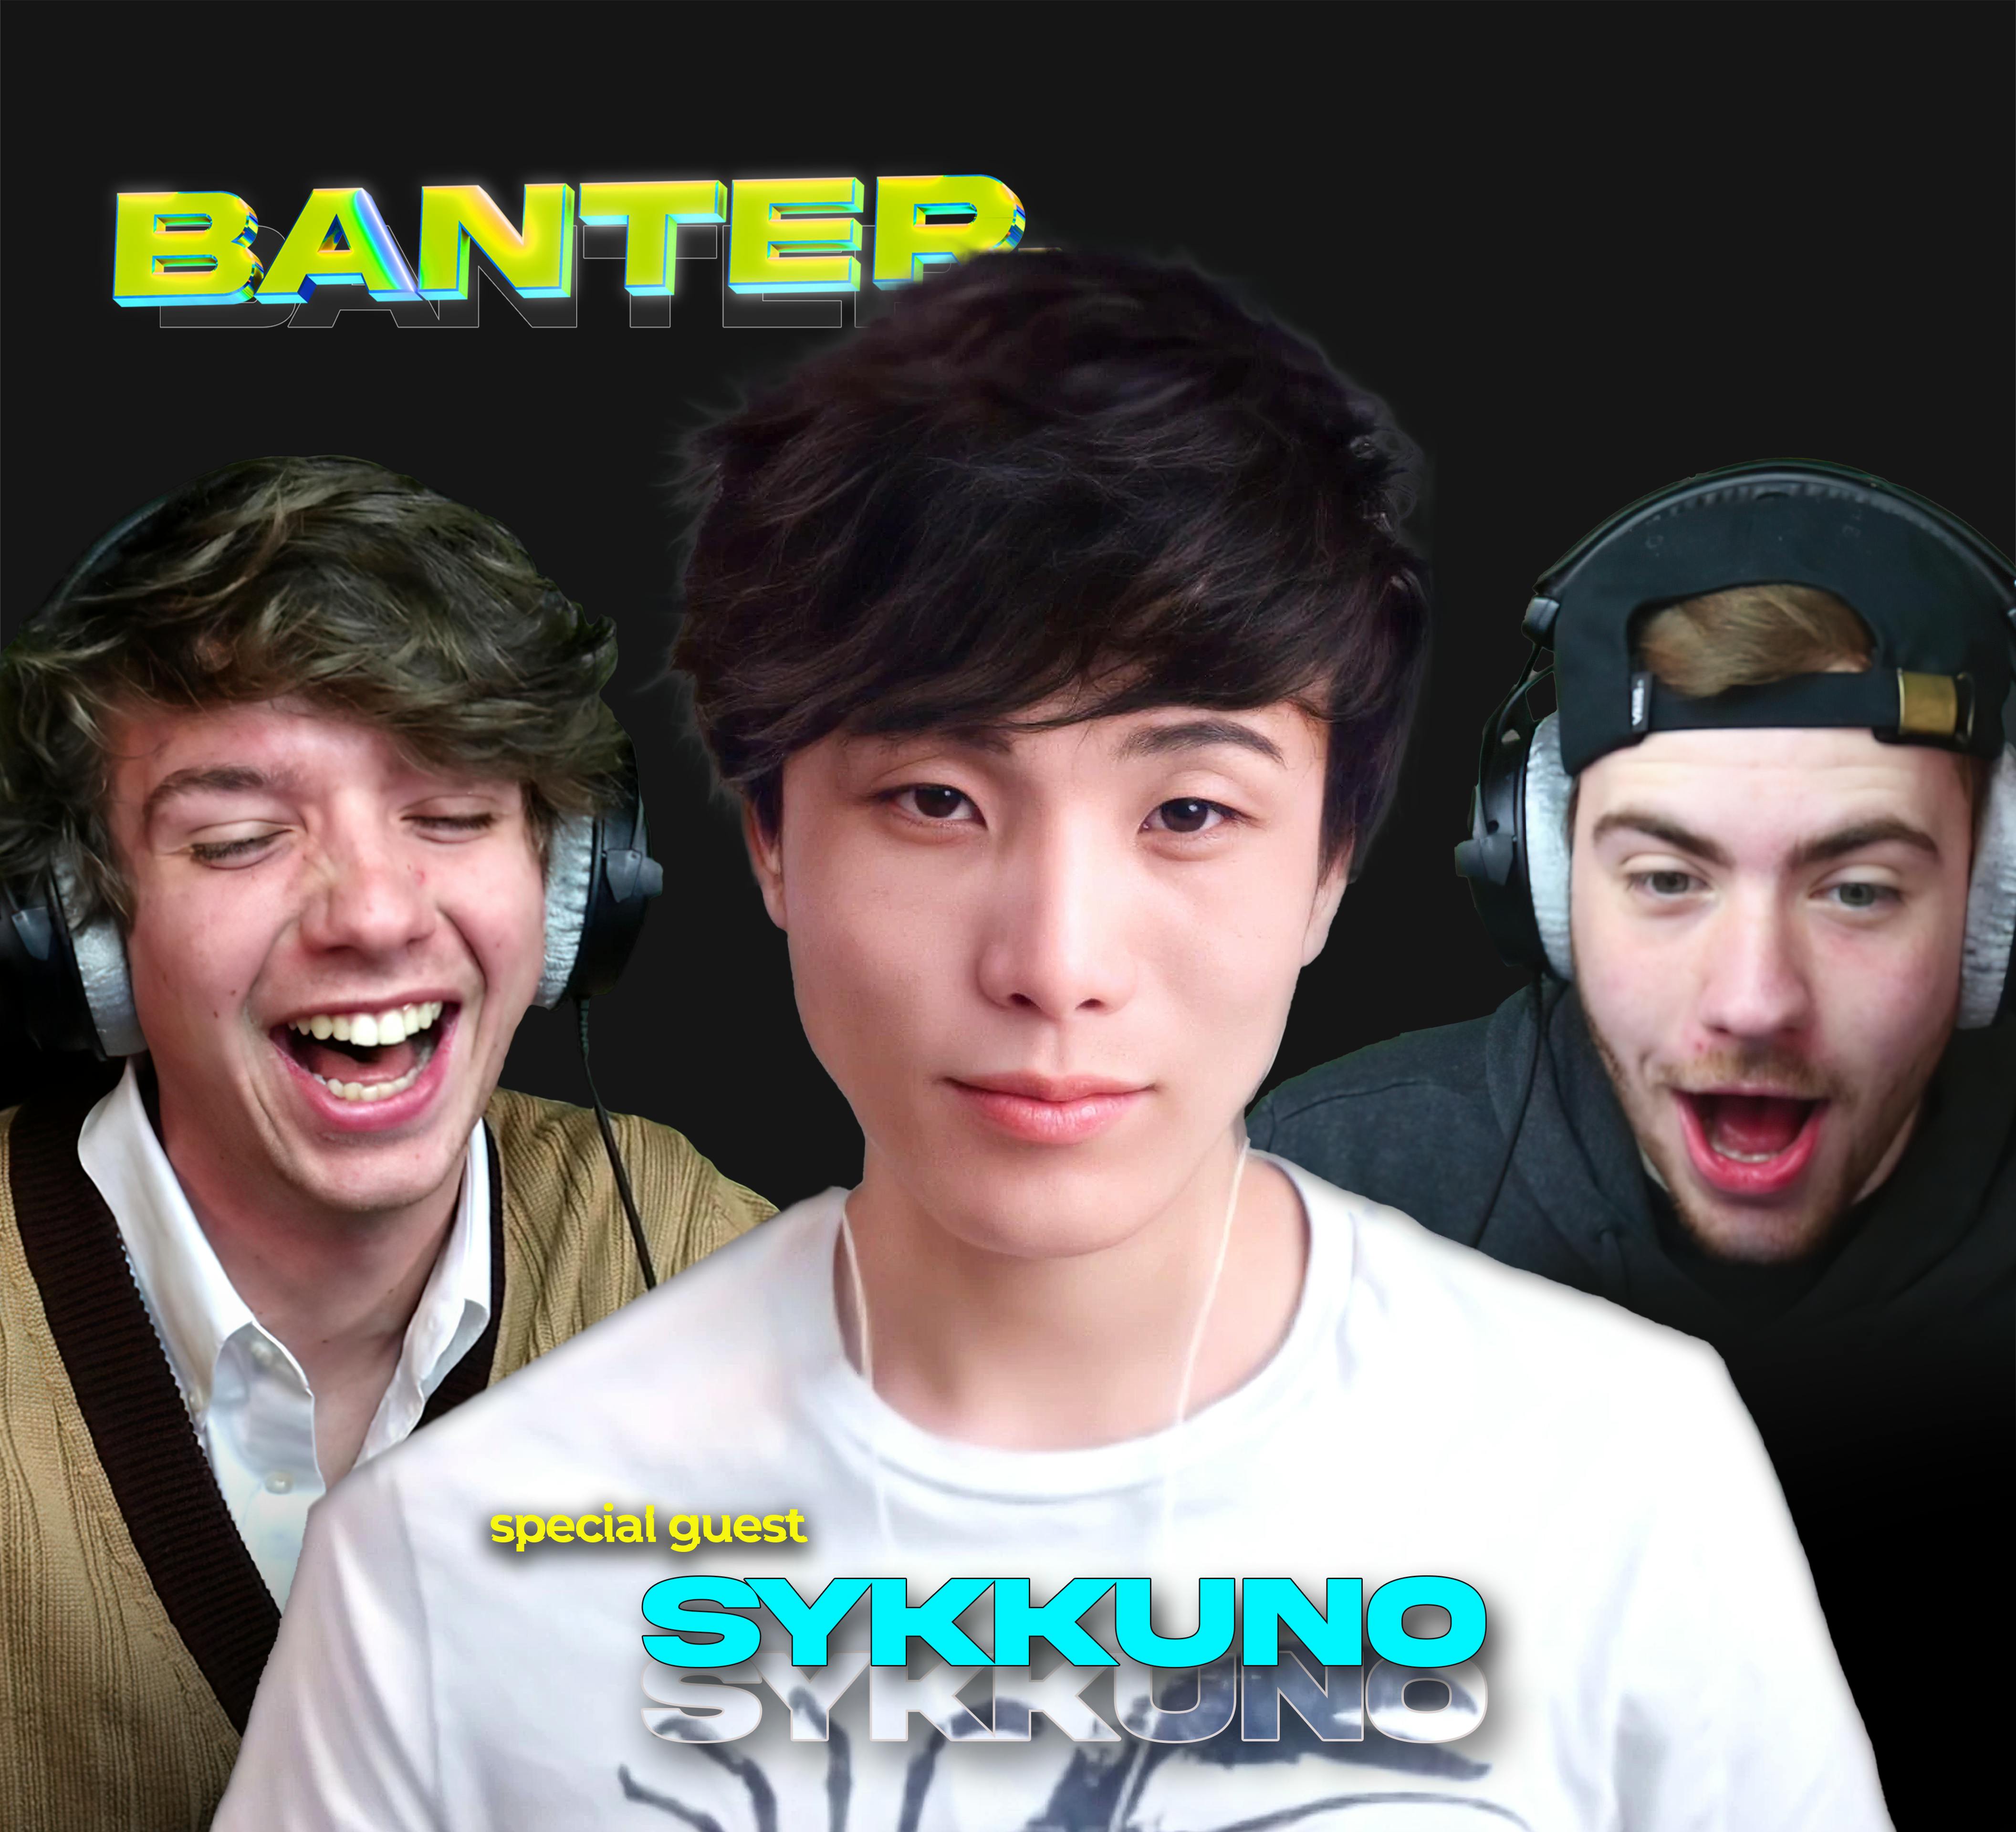 Sykkuno joins Karl Jacobs and Sapnap for the return of Banter